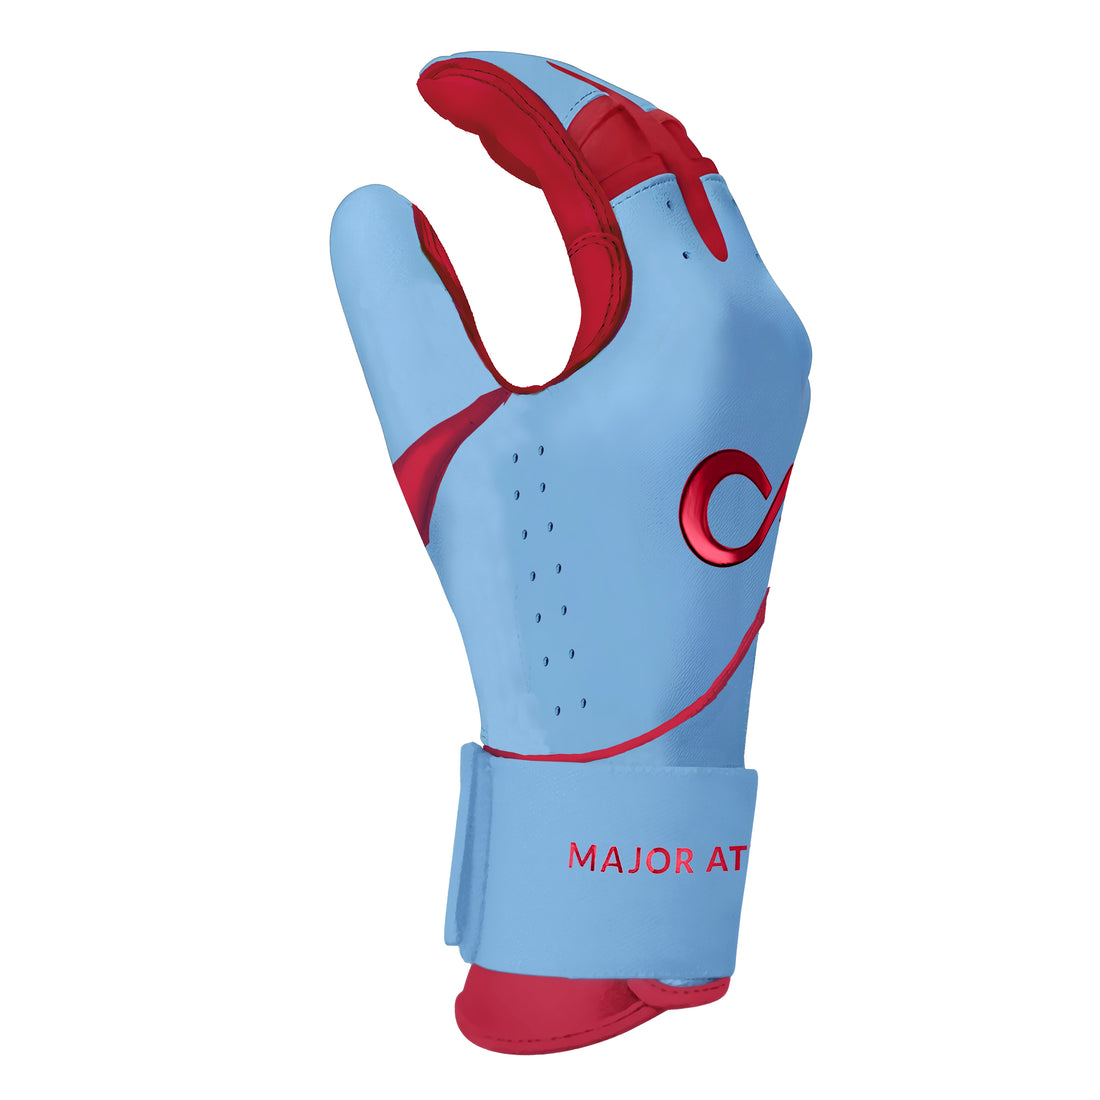 POWDER BLUE & RED LONG CUFF PRO PREMIUM 100% 0.9MM AAA AFRICAN GOAT® LEATHER